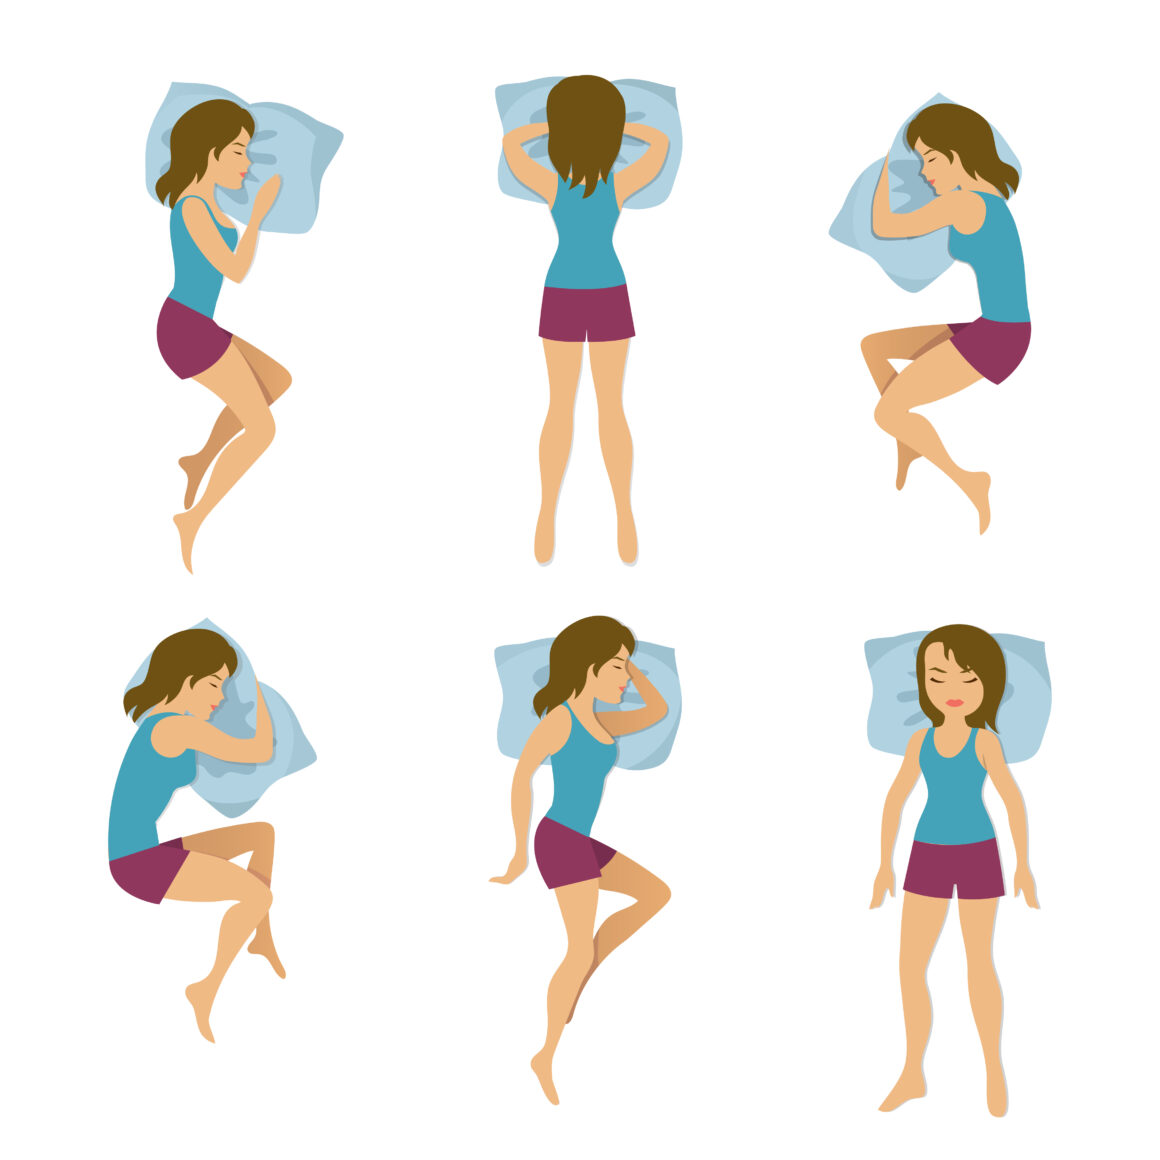 Women sleeping positions vector illustration. Woman sleep poses in bed